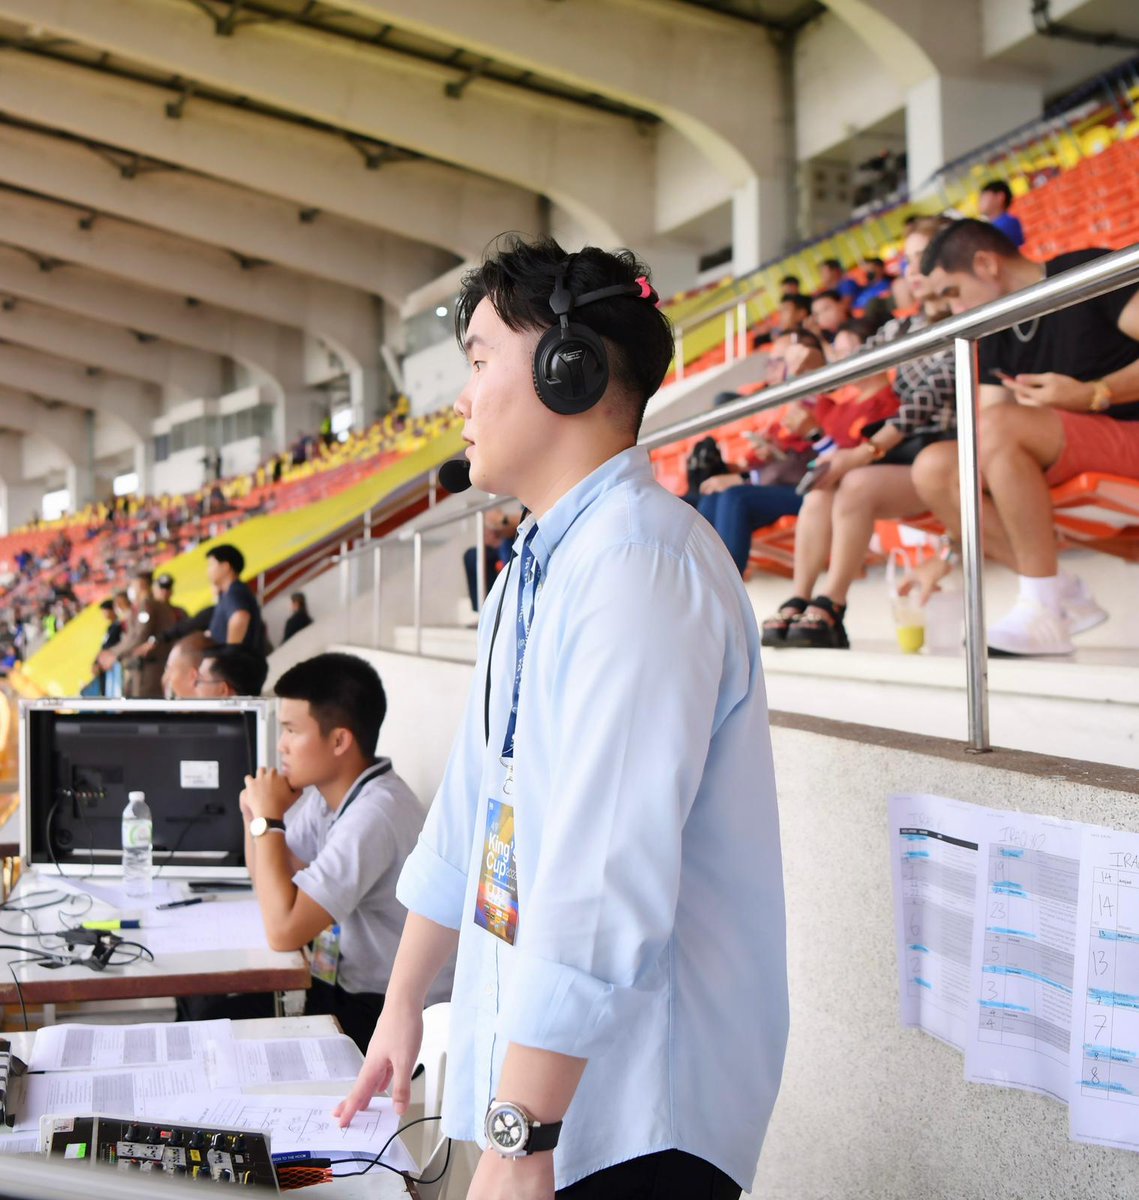 ⚽👟 Backheel Media is proud to have provided English commentary during the King’s Cup 2023 tournament in Chiang Mai, Thailand 🇹🇭

🔥 Our Content Manager @ta_lao19 was on the call for all 4 matches at the stadium 🏟️

Thanks to our client Plan B Media for the opportunity 🤝